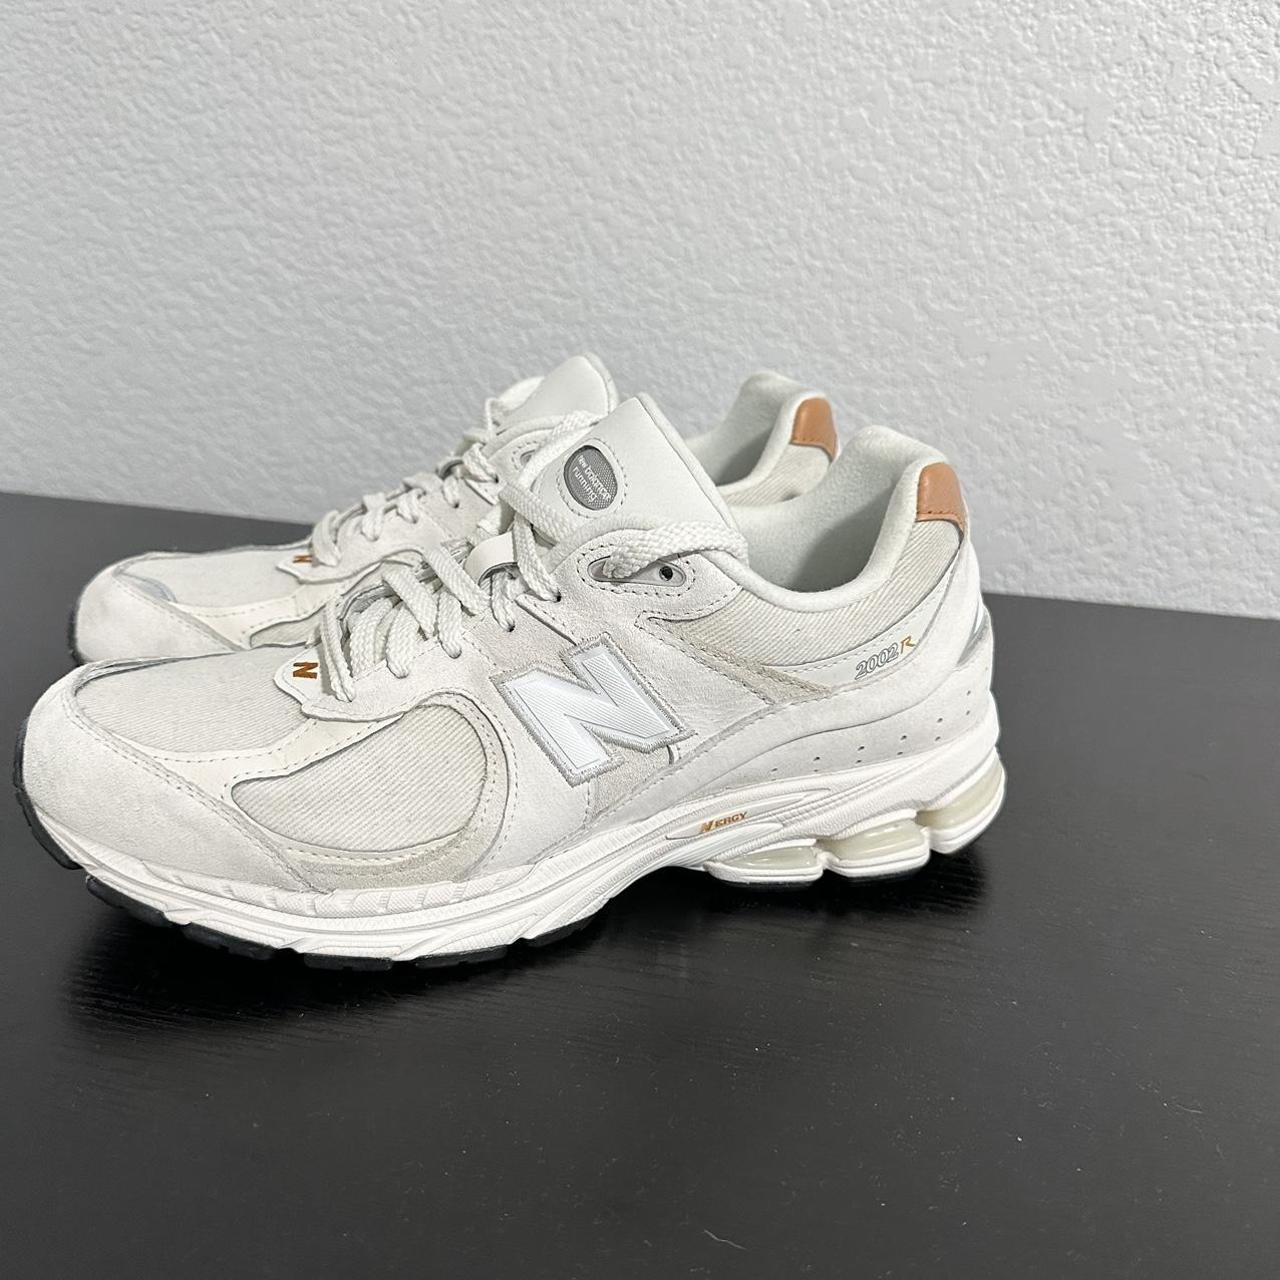 New Balance Men's White and Brown Trainers | Depop